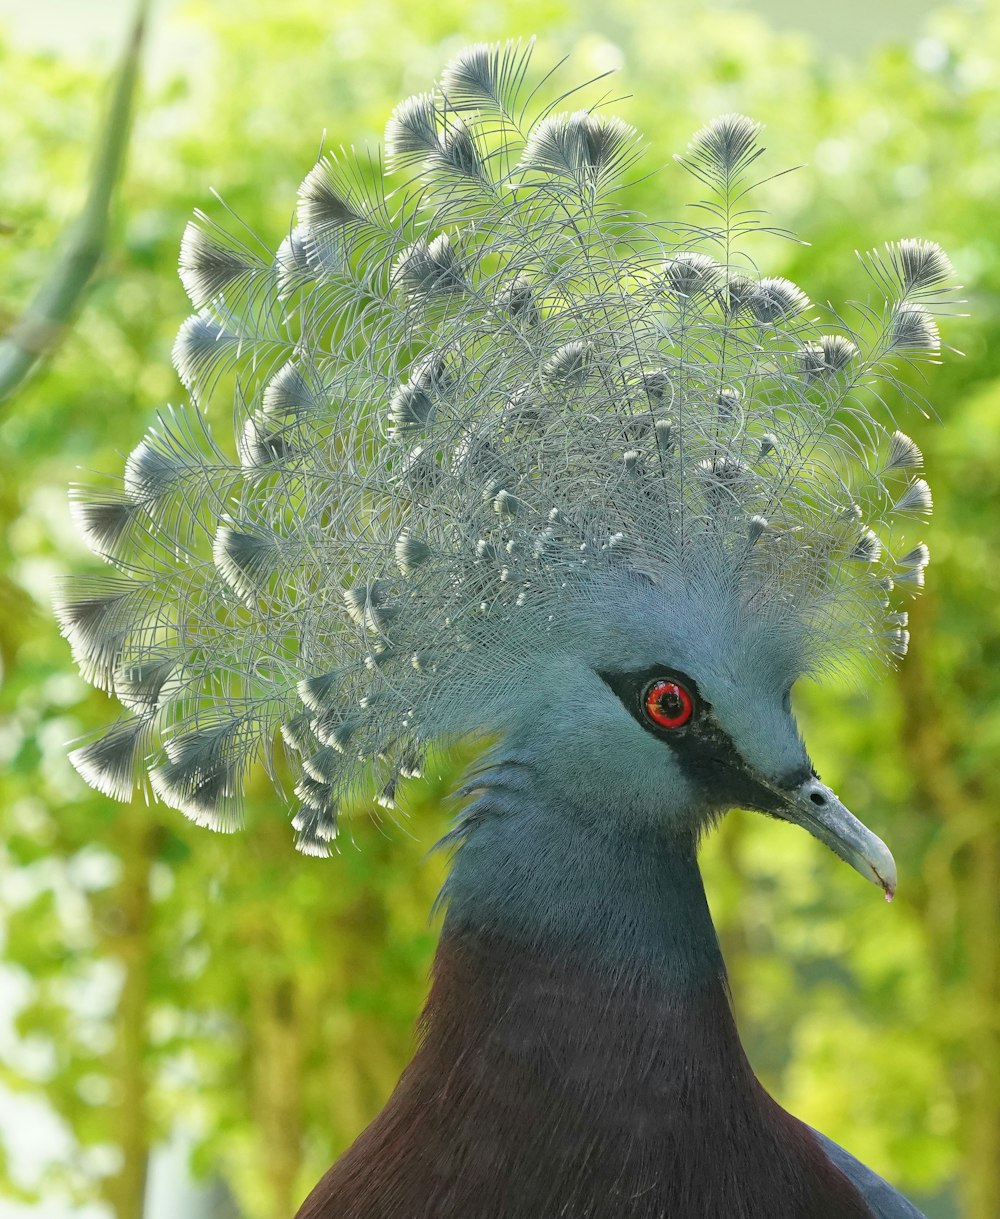 a close up of a bird with a bush on its head